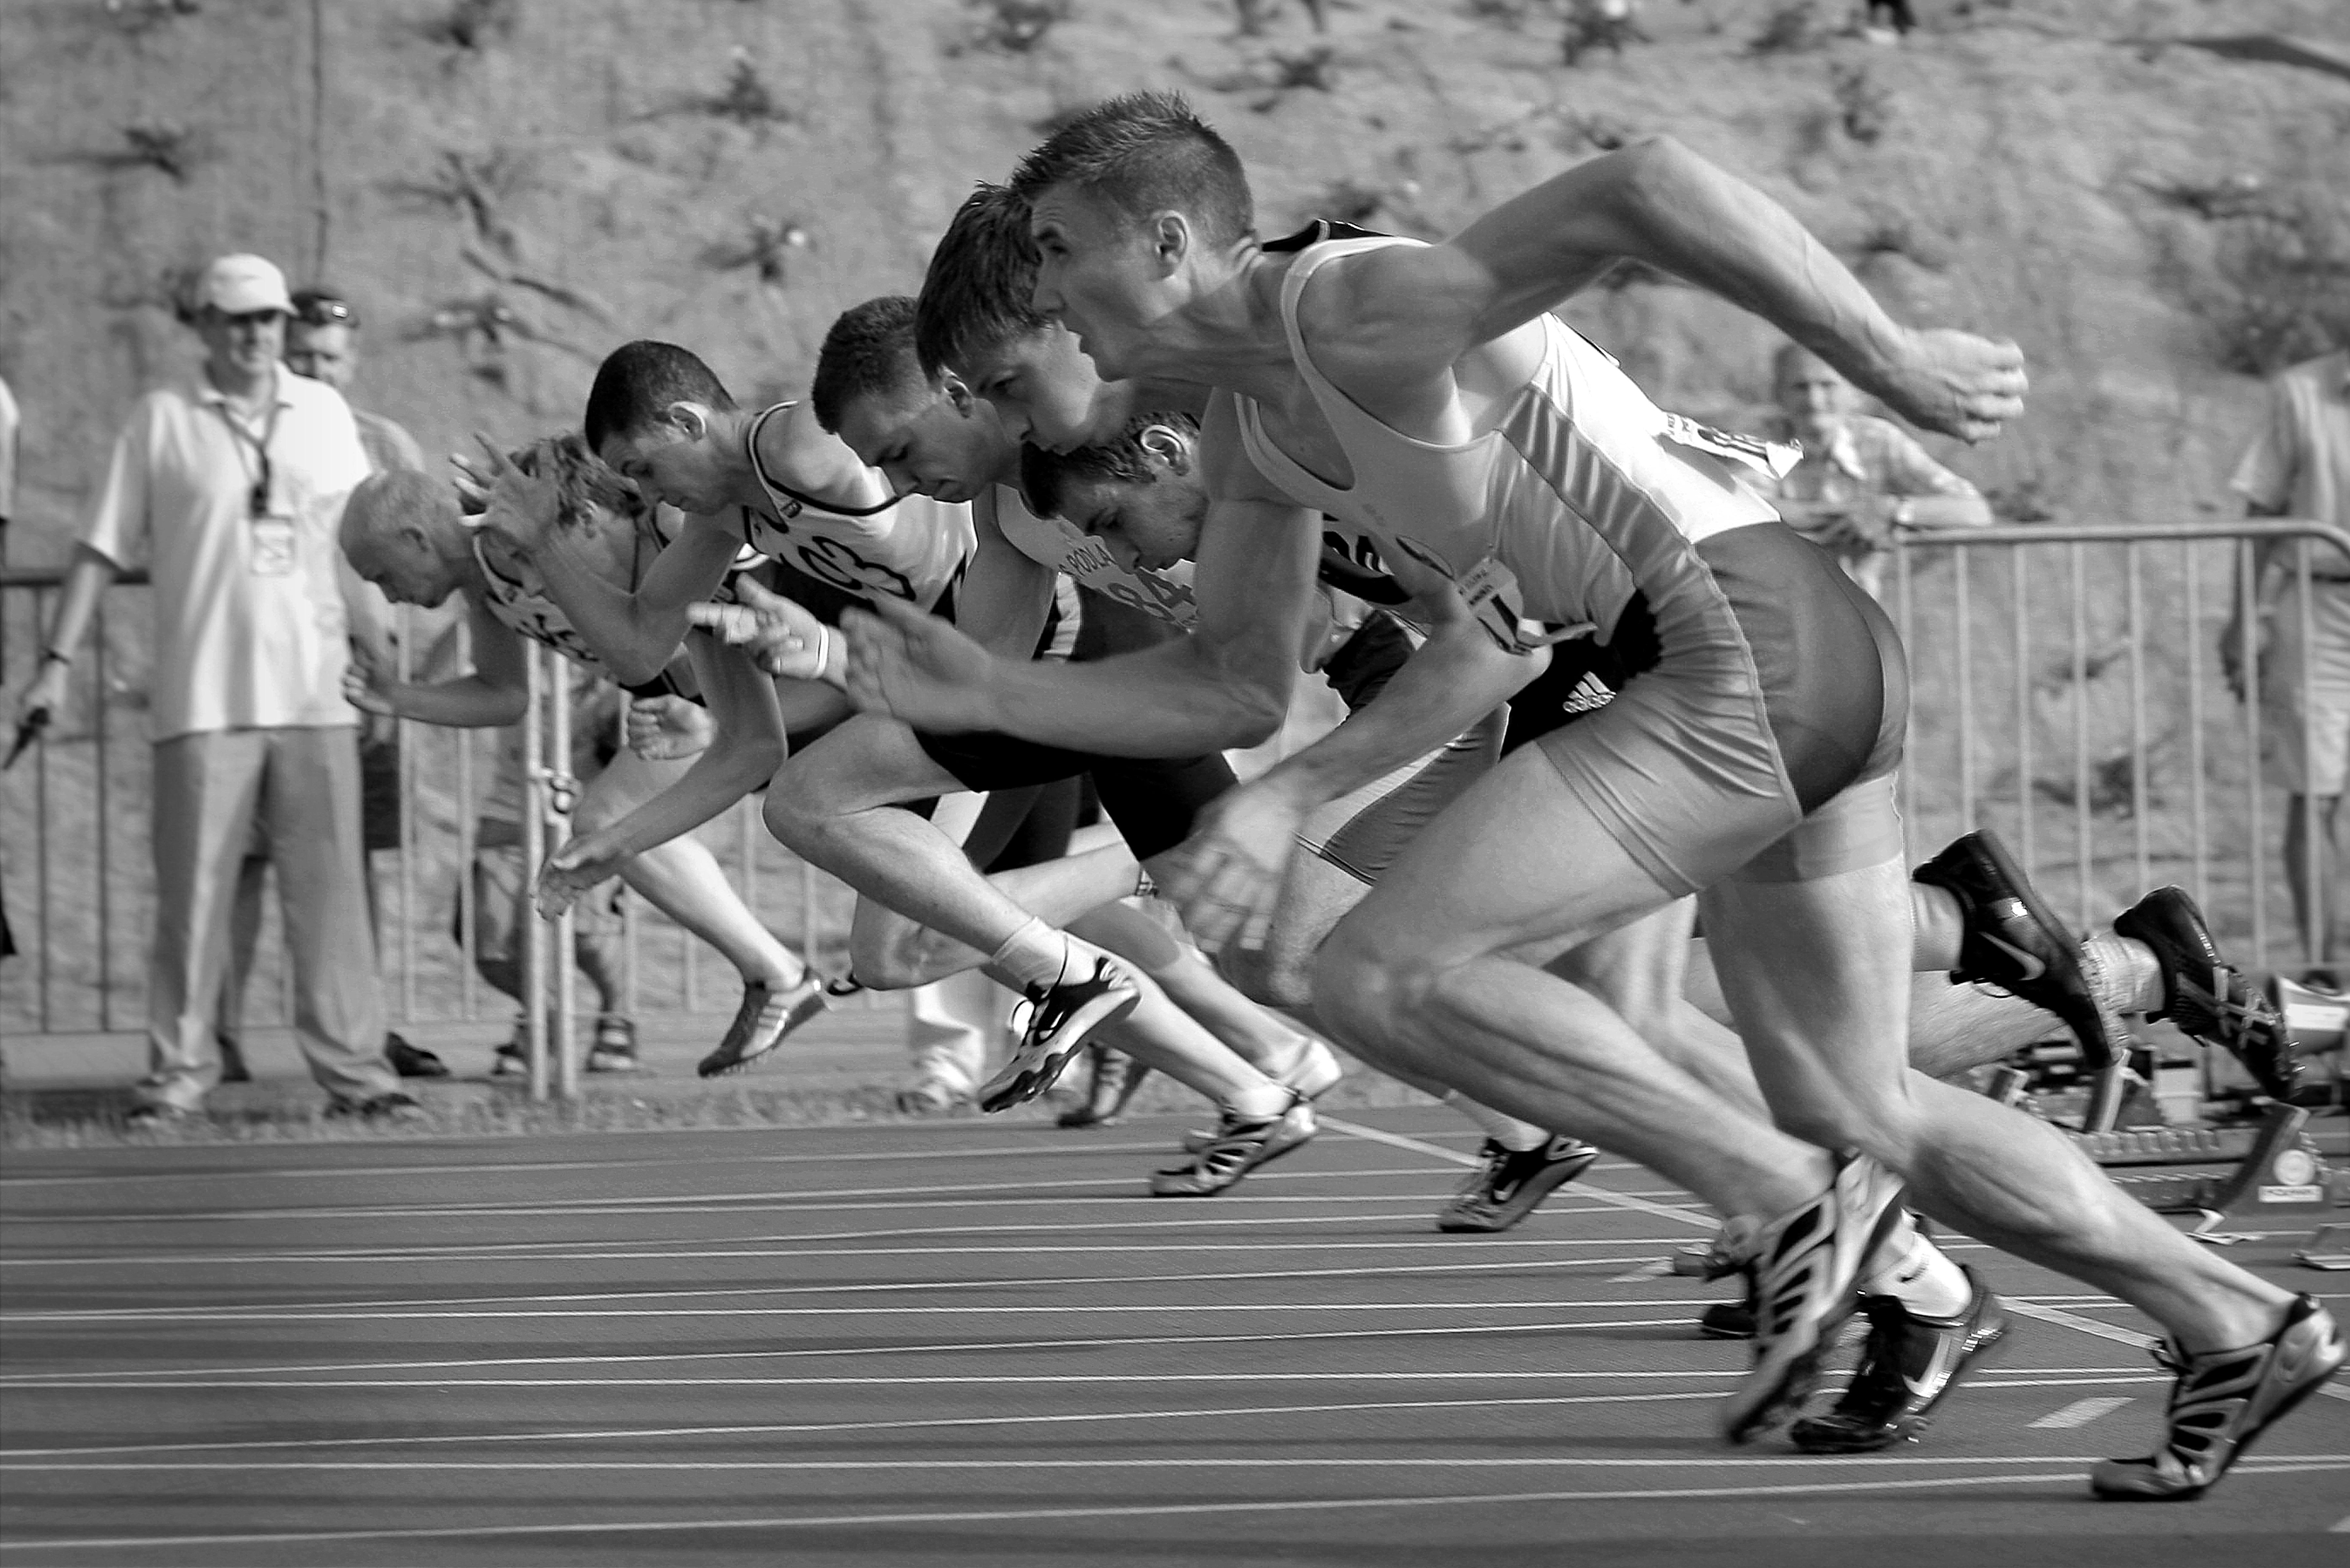 Men participating in a running race